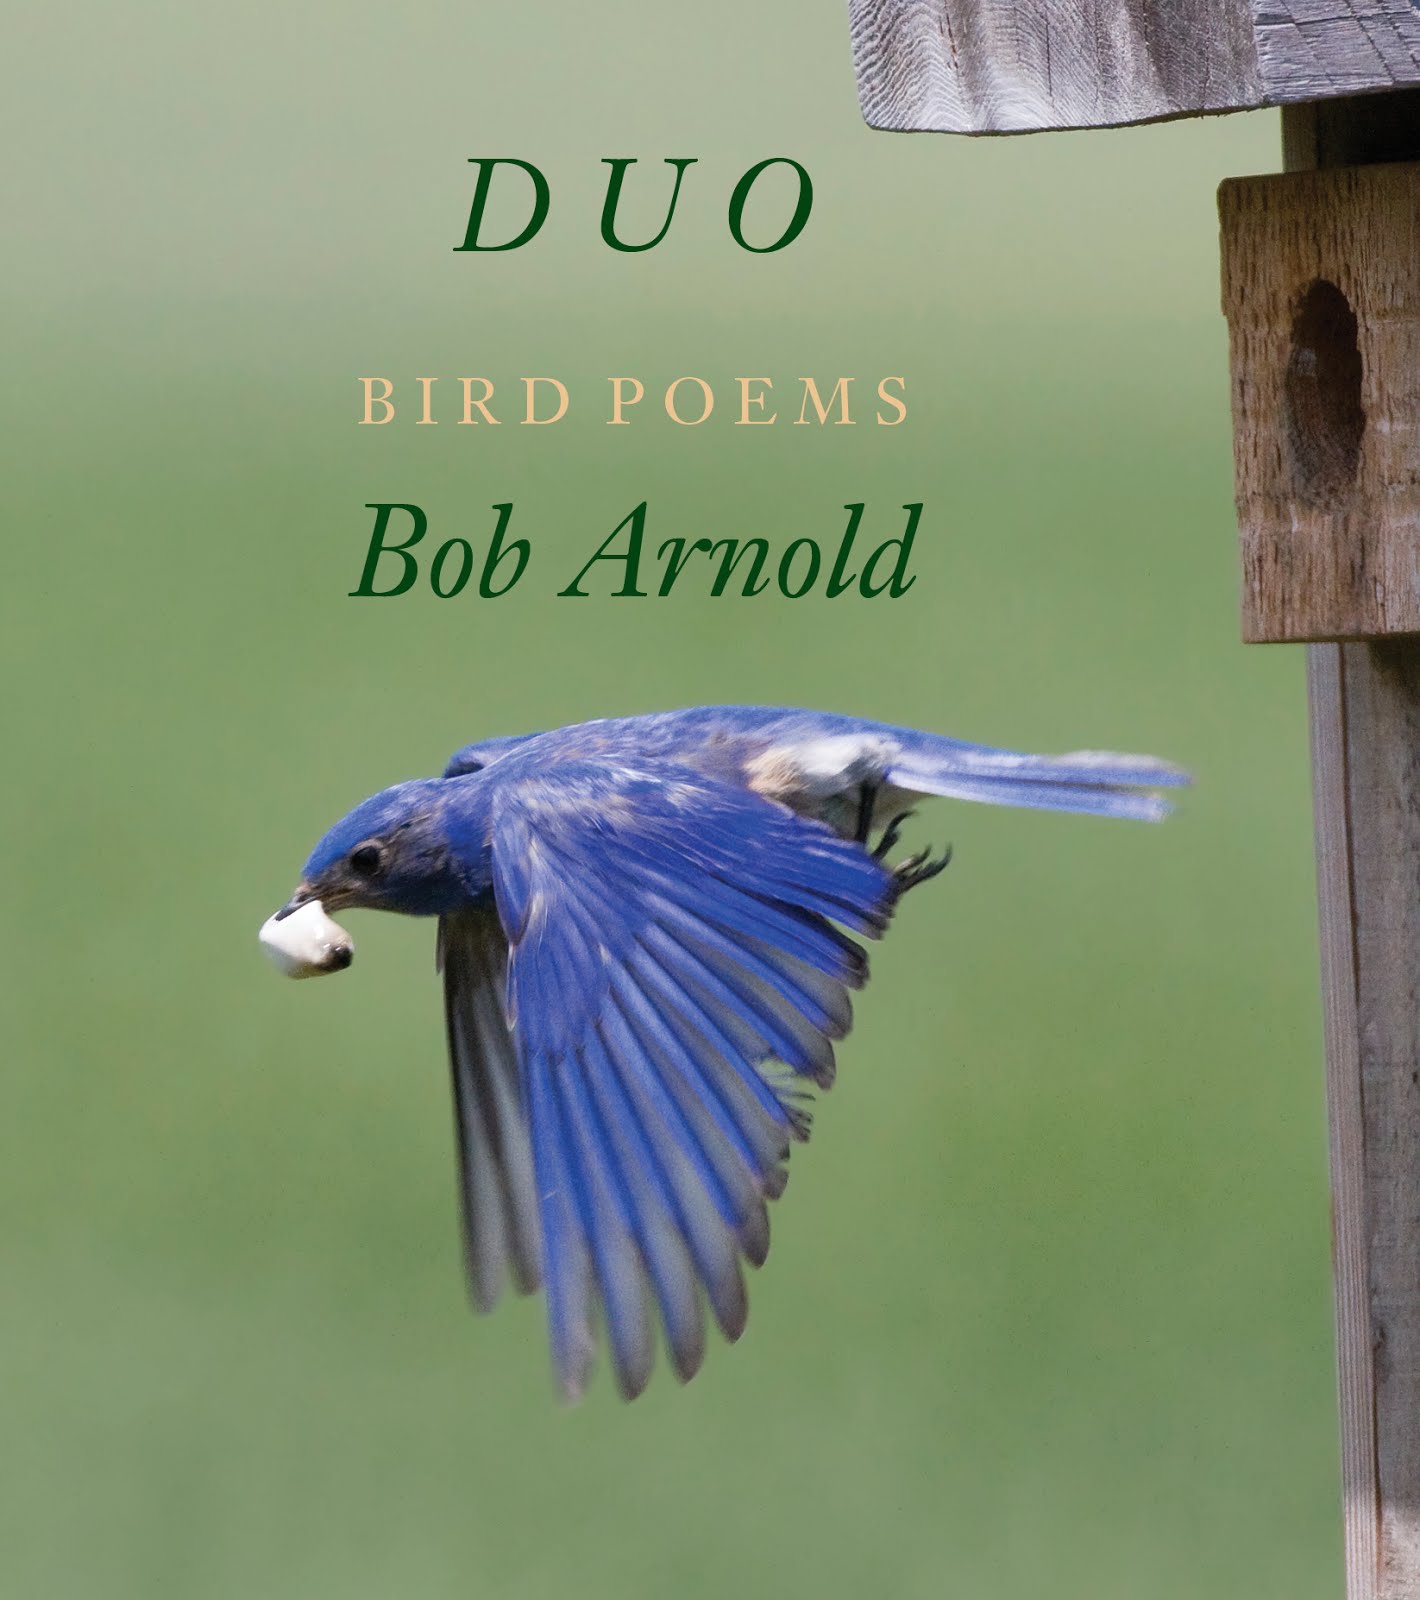 Duo by Bob Arnold — New from Longhouse   Please link to A Longhouse Birdhouse for more information